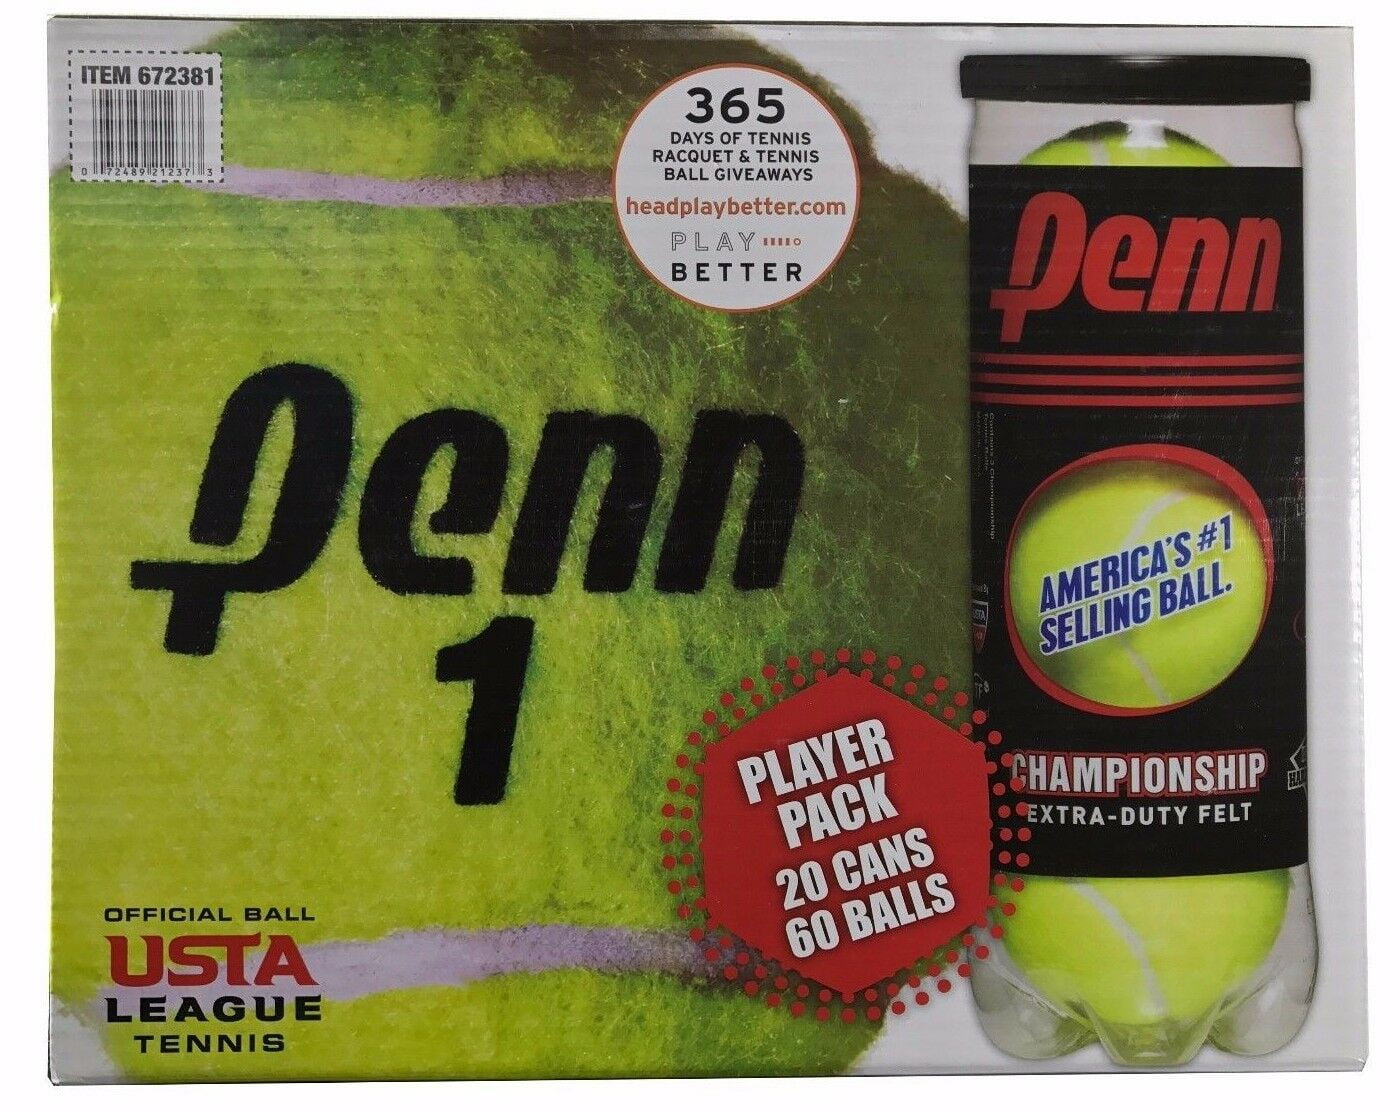 Penn Championship Extra-Duty Felt Tennis Balls CASE OF 20 Cans IN HAND 